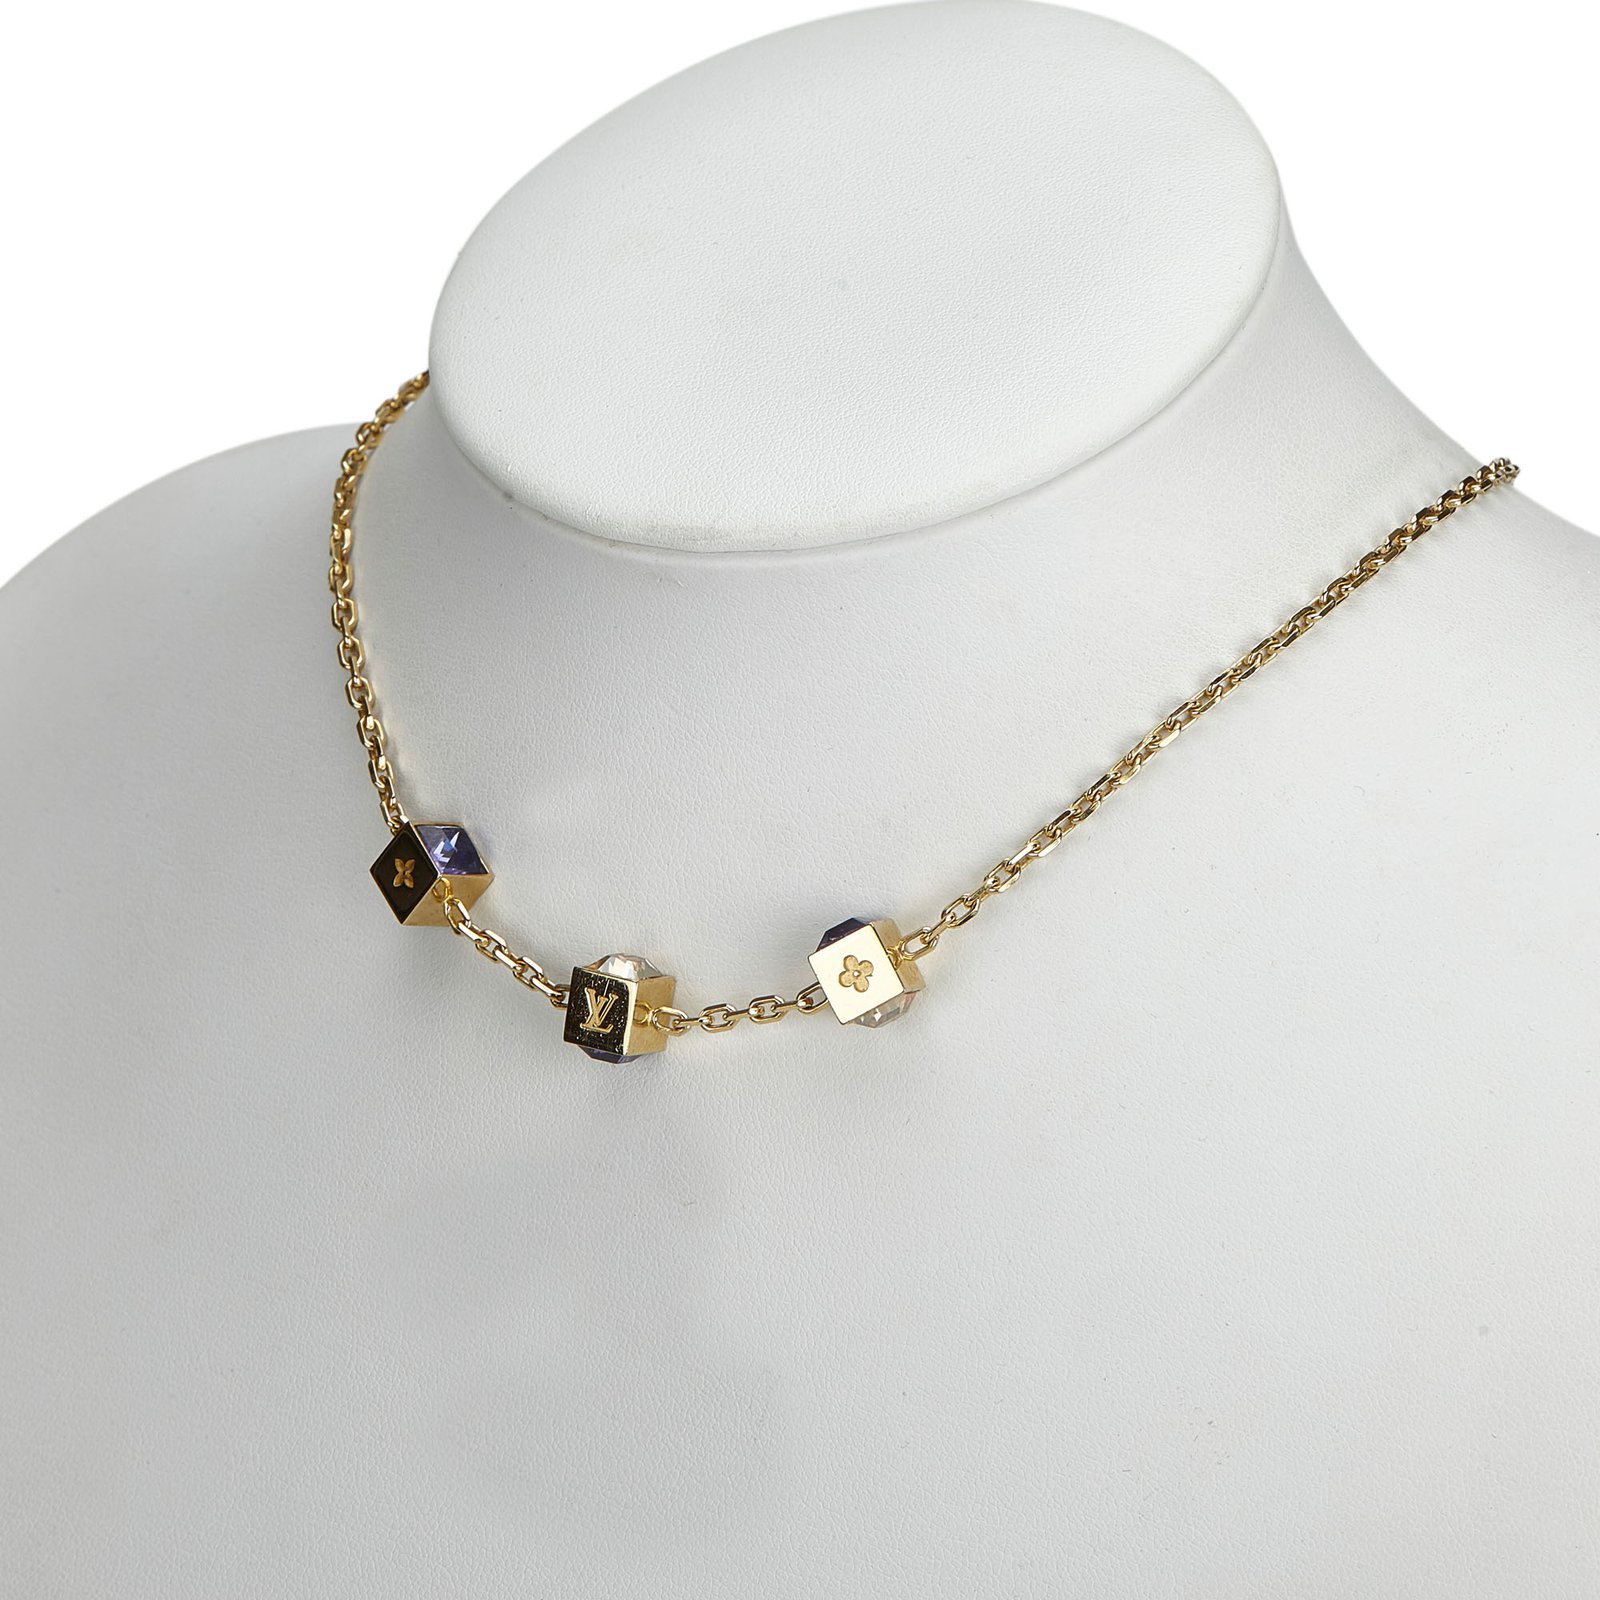 Louis Vuitton LV Monogram Gold The Gamble Crystal Necklace LV-0814N-0004